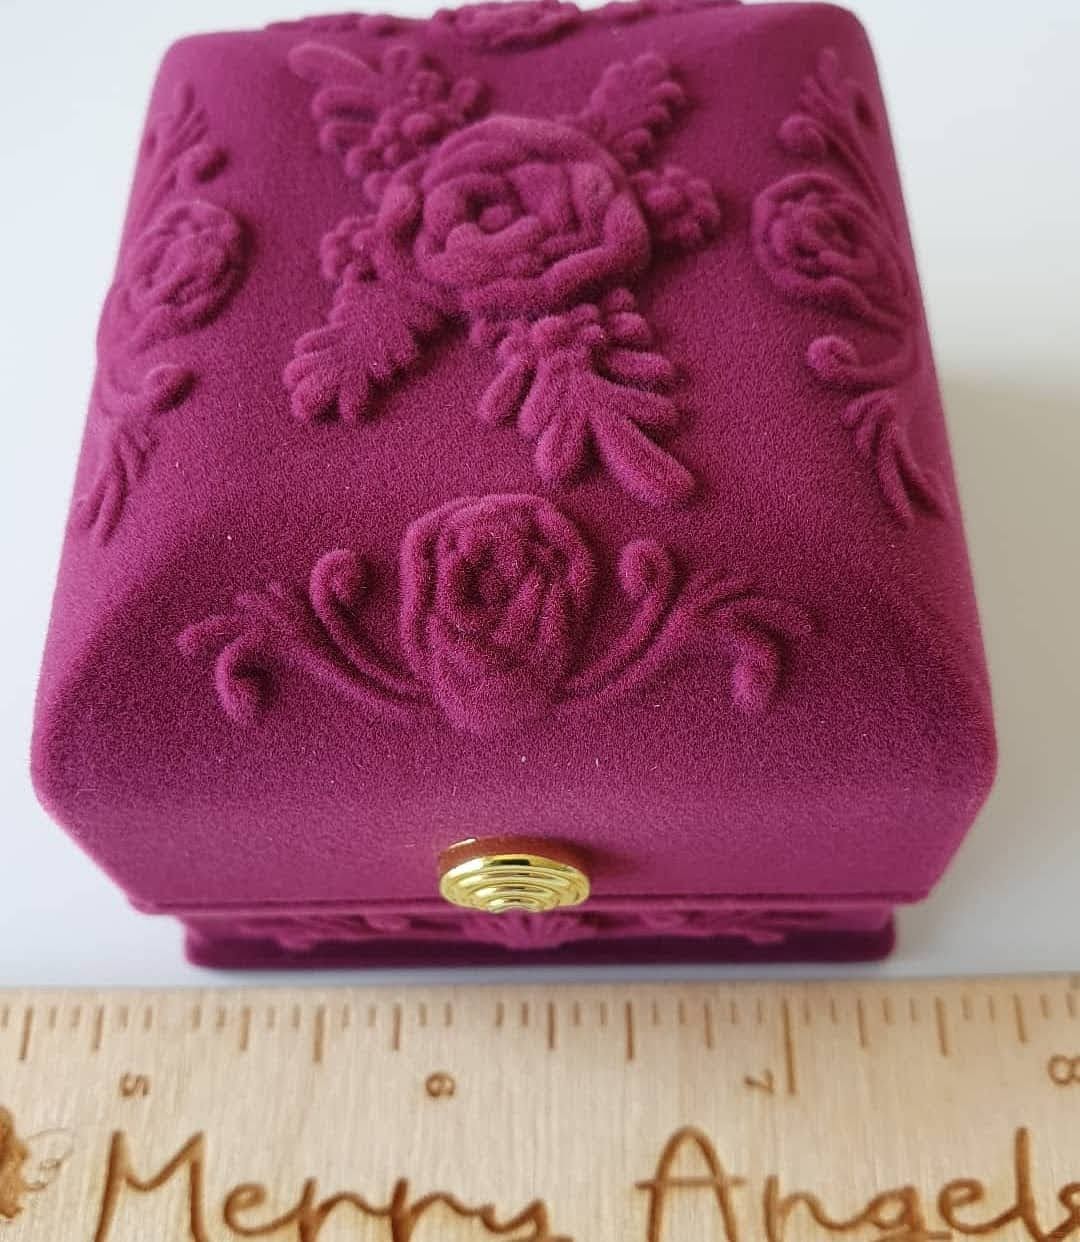 This picture shows a beautiful pink suede box with rose details on the lid